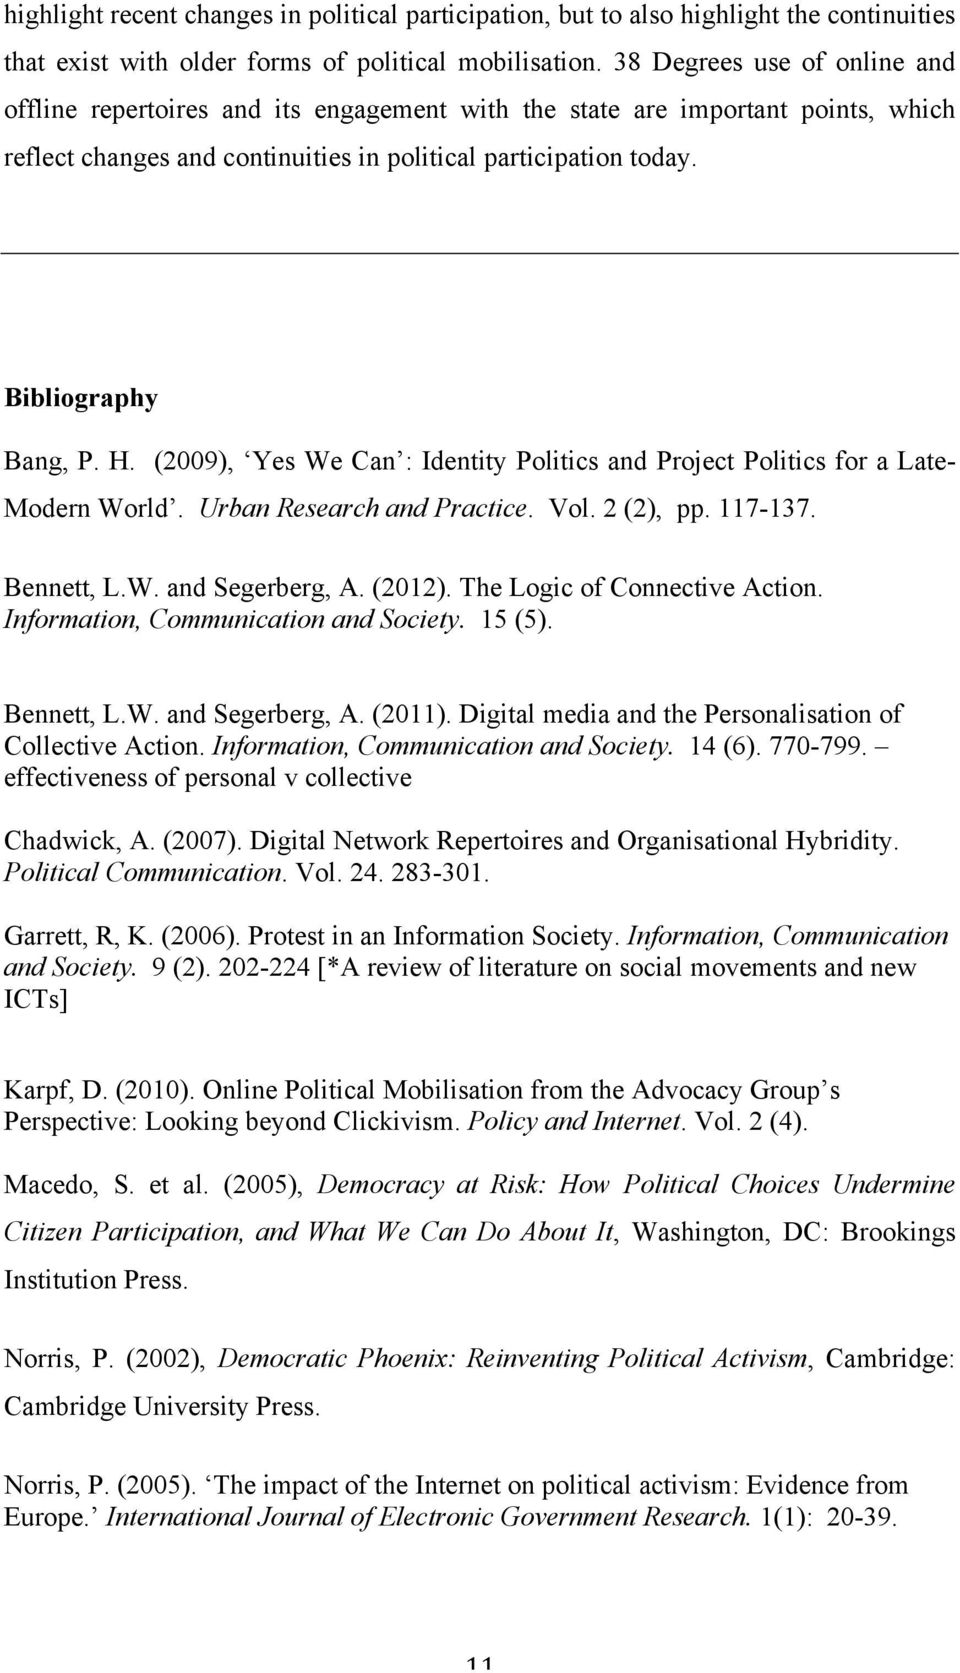 H. (2009), Yes We Can : Identity Politics and Project Politics for a Late- Modern World. Urban Research and Practice. Vol. 2 (2), pp. 117-137. Bennett, L.W. and Segerberg, A. (2012).